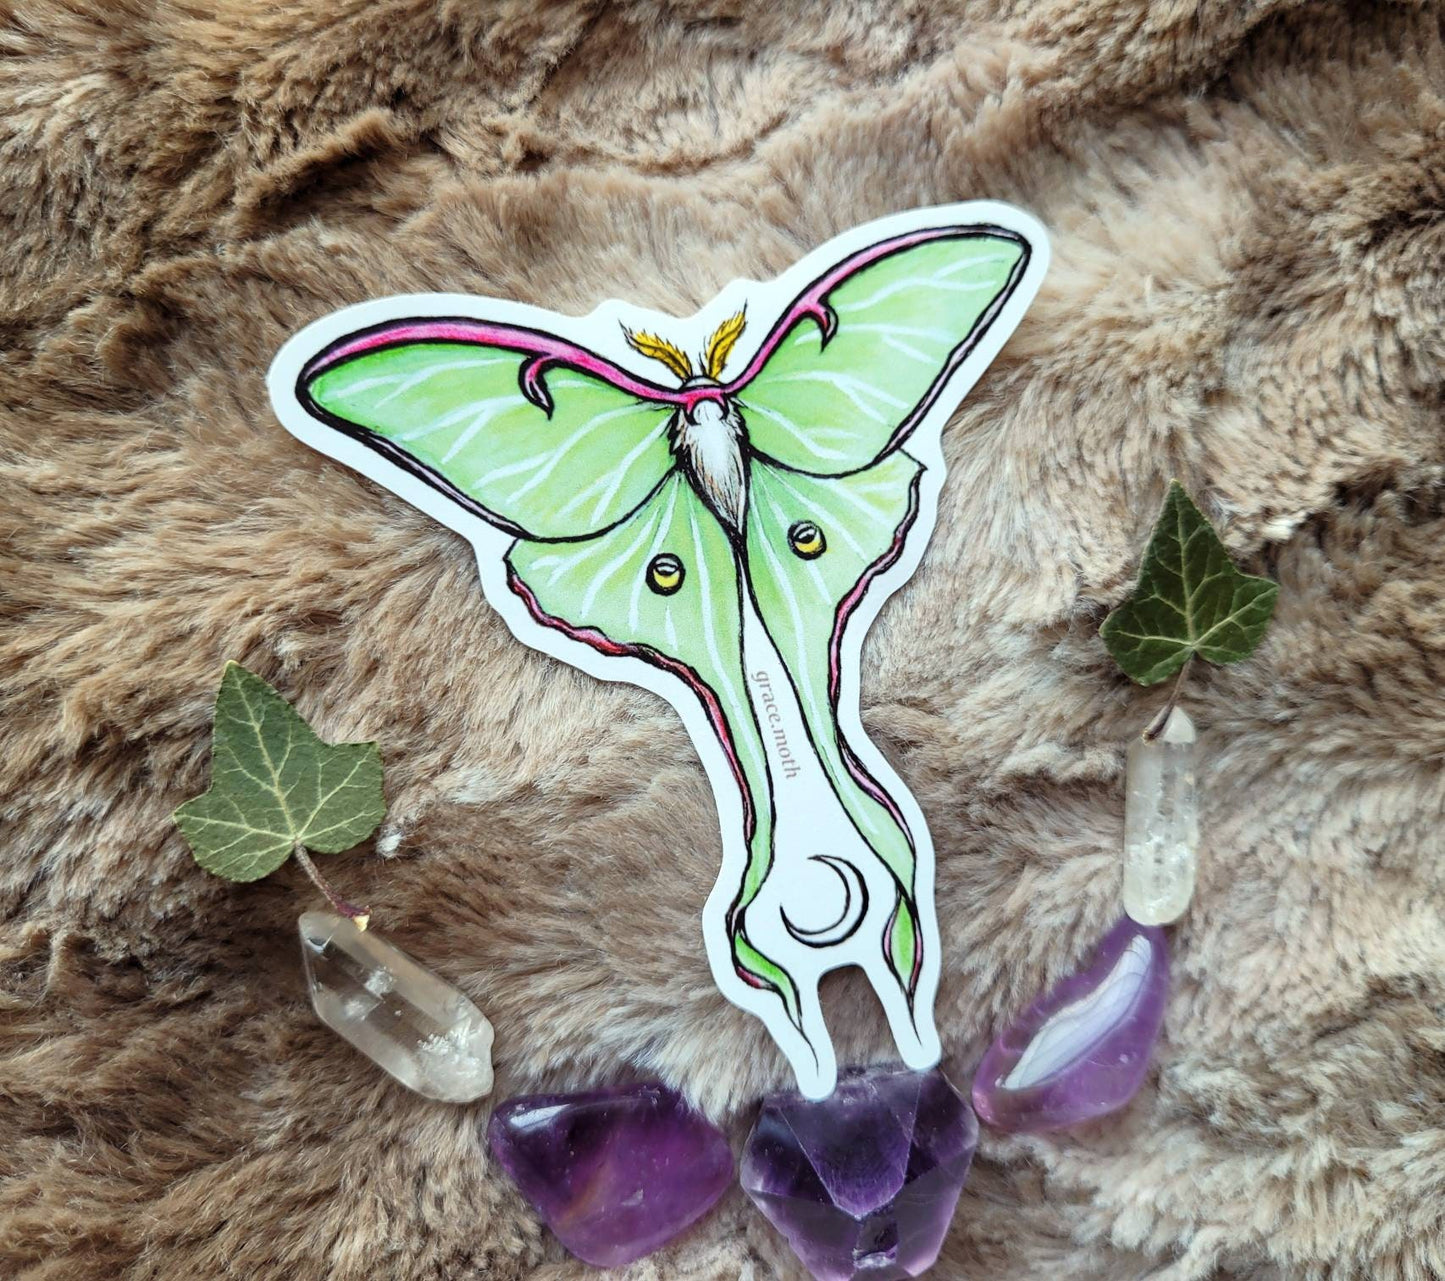 Luna Moth - Vinyl Sticker 10cm by 9cm - Illustrated by Grace moth. Taxidermy inspired, cottagecore, insect, moon magic, witchy